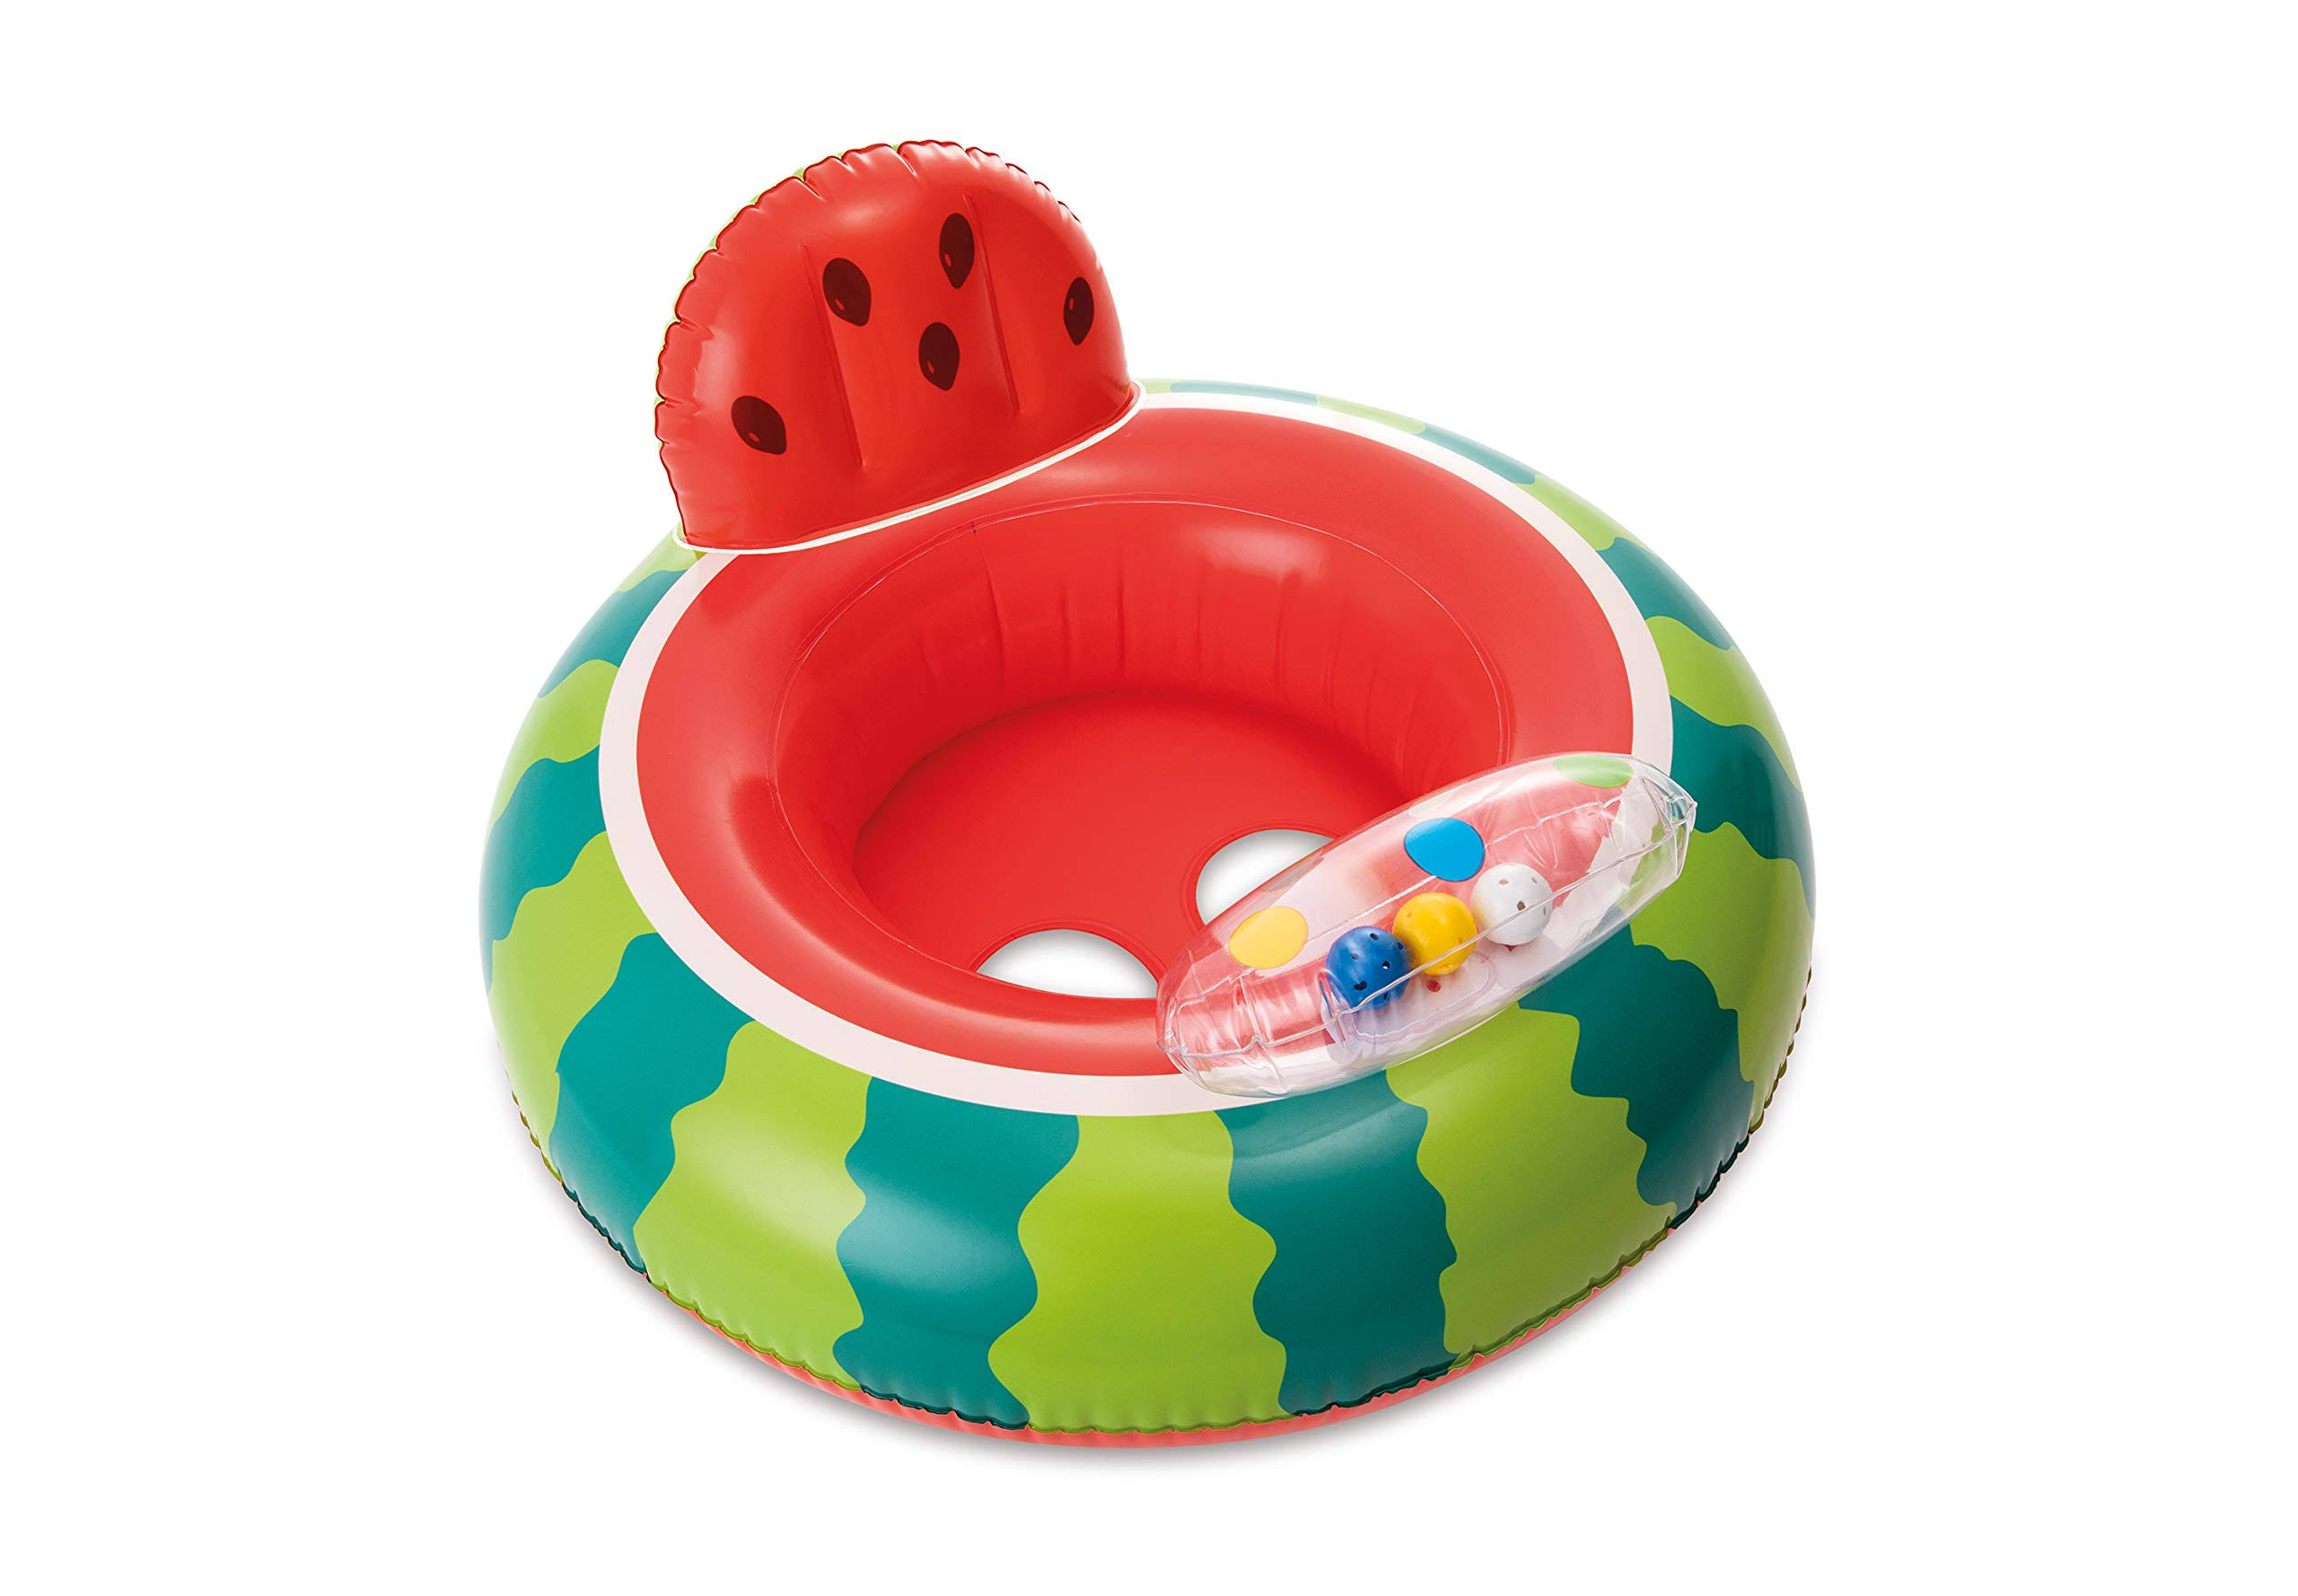 Intex Watermelon Baby Float, 29in x 27in, for Ages 1-2